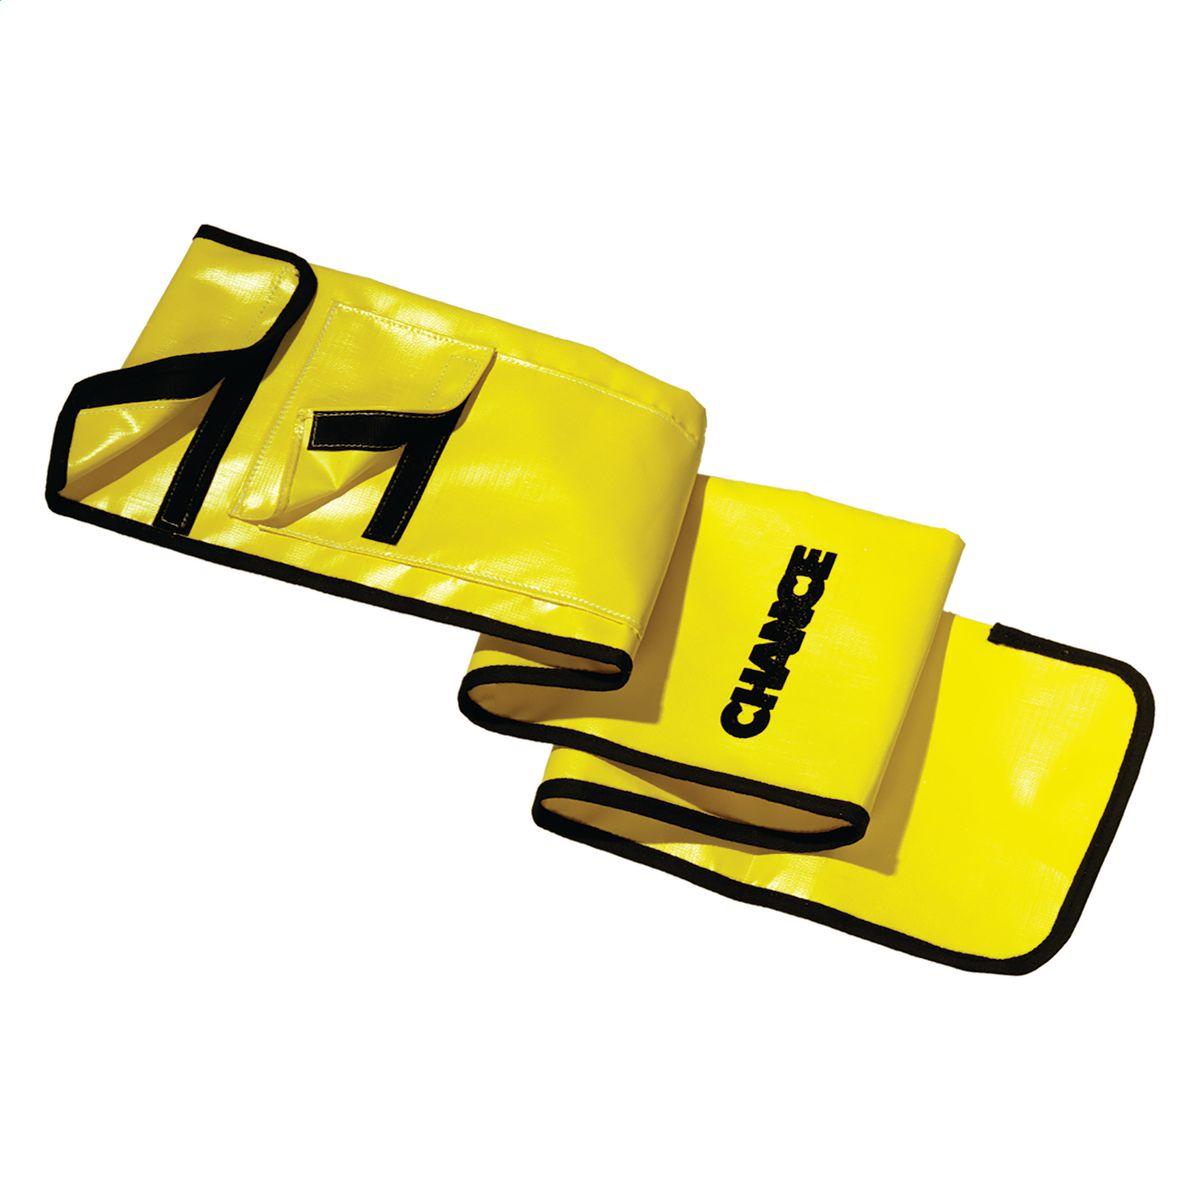 Hubbell P6436 TOOL BAG, 6'10" L X 6.6" W, Chance waterproof storage bags help guard against contaminants and abrasion to help maintain the insulating properties of hotline tools. Yellow heavy-duty vinyl-impregnated fabric lasts for years of rugged service. Snaps, Velcr